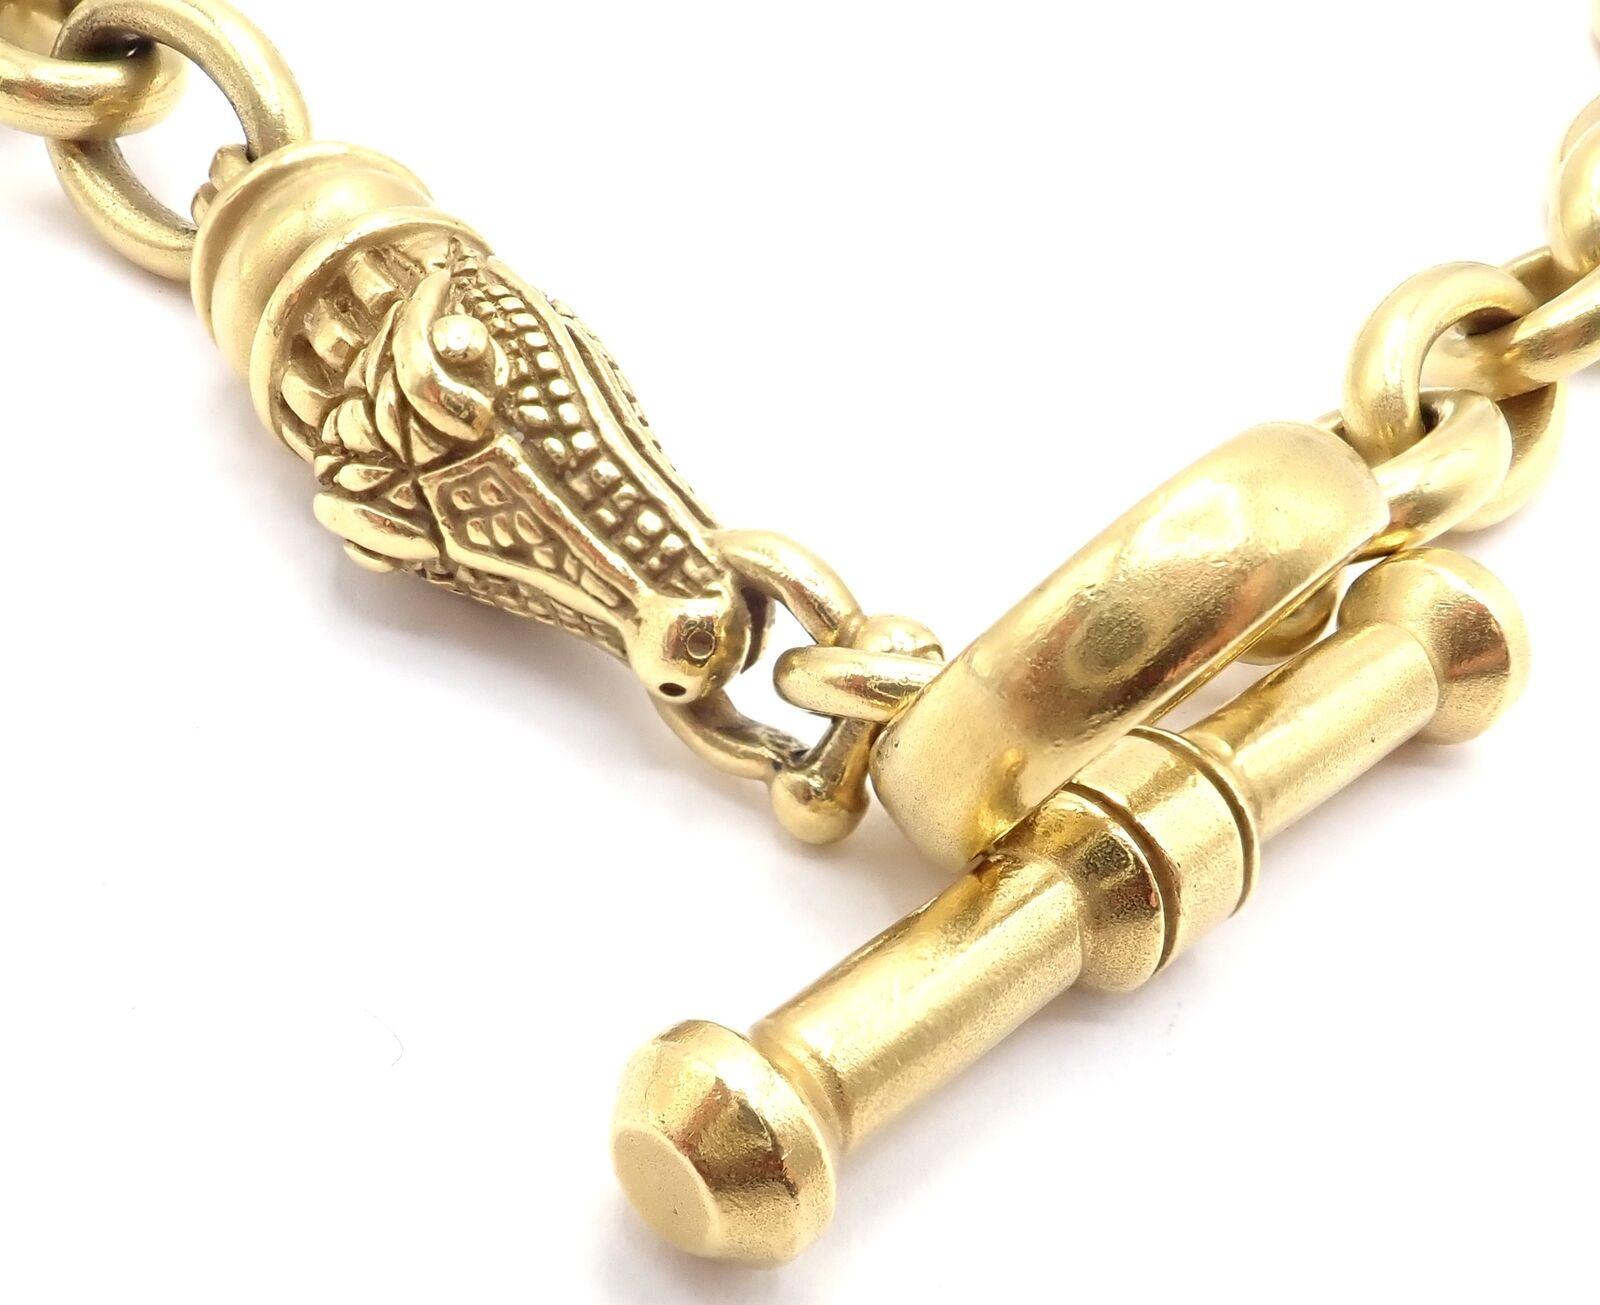 18k Yellow Gold Alligator Head Link Toggle Necklace by Barry Kieselstein Cord.
Details:
Measurements: Alligator head 31mm x 10mm
Toggle 36mm x 7mm
Weight: 200.4 grams
Length: 18